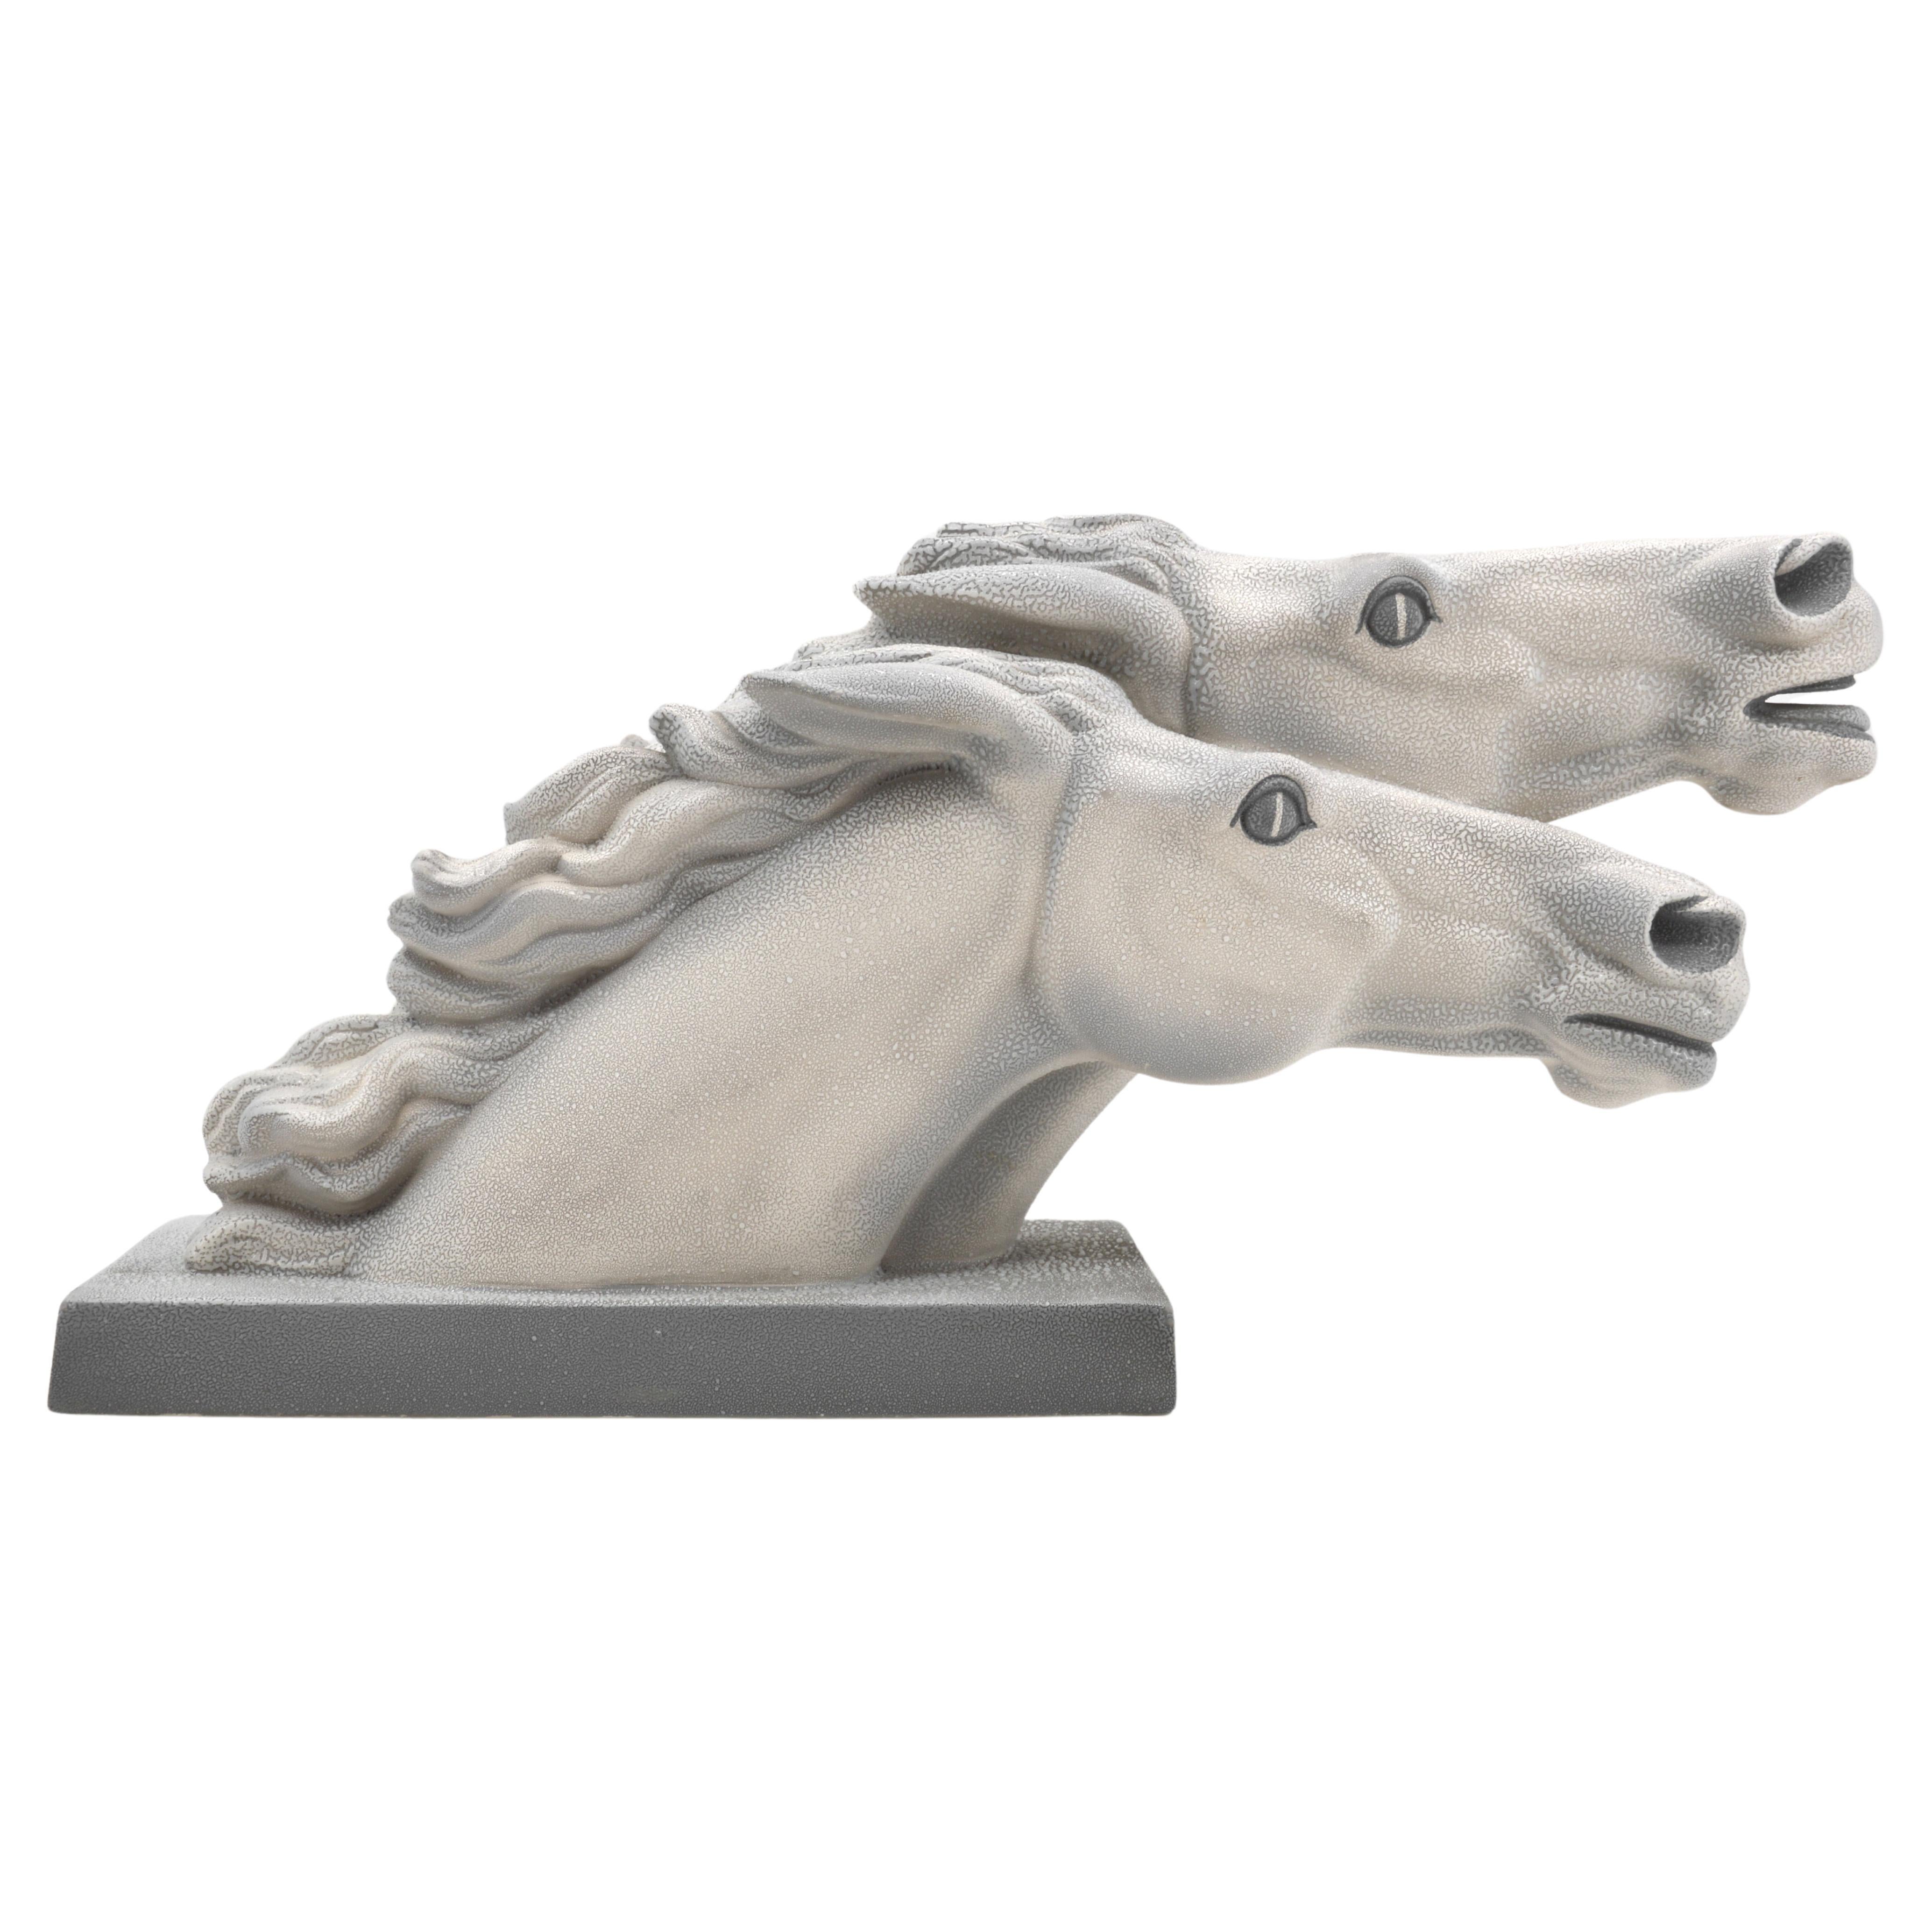 Charles Lemanceau, French Art Deco Horse Statue "at the Winning Post", 1930s For Sale